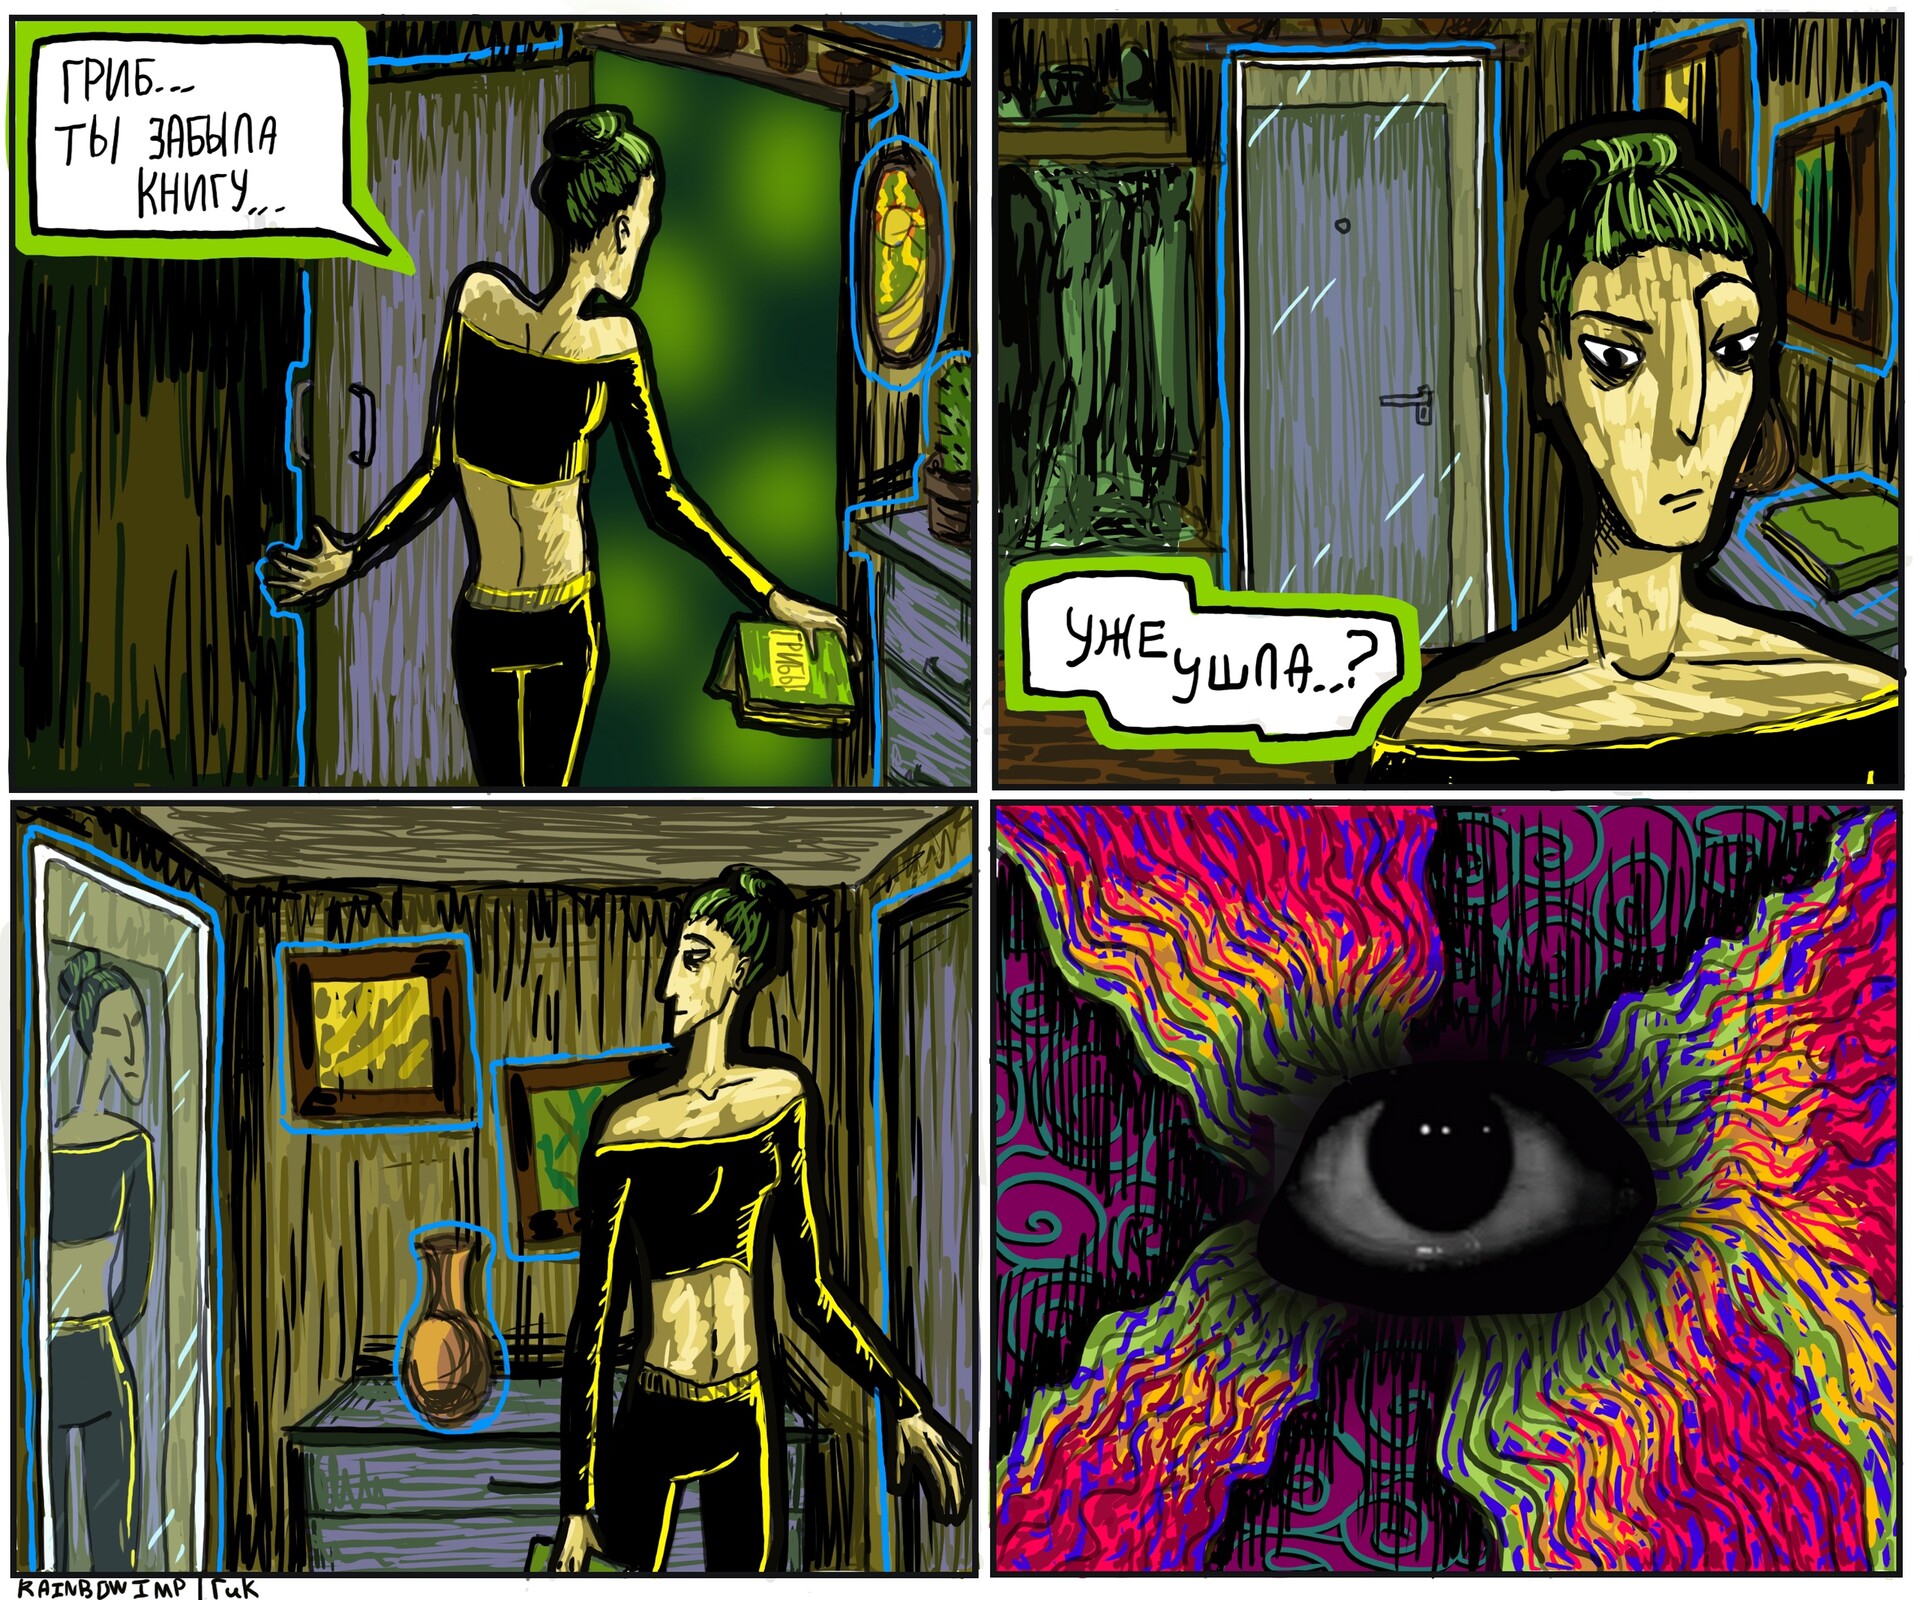 ArtStation - THROUGH THE LOOKING GLASS: comic strip with nice